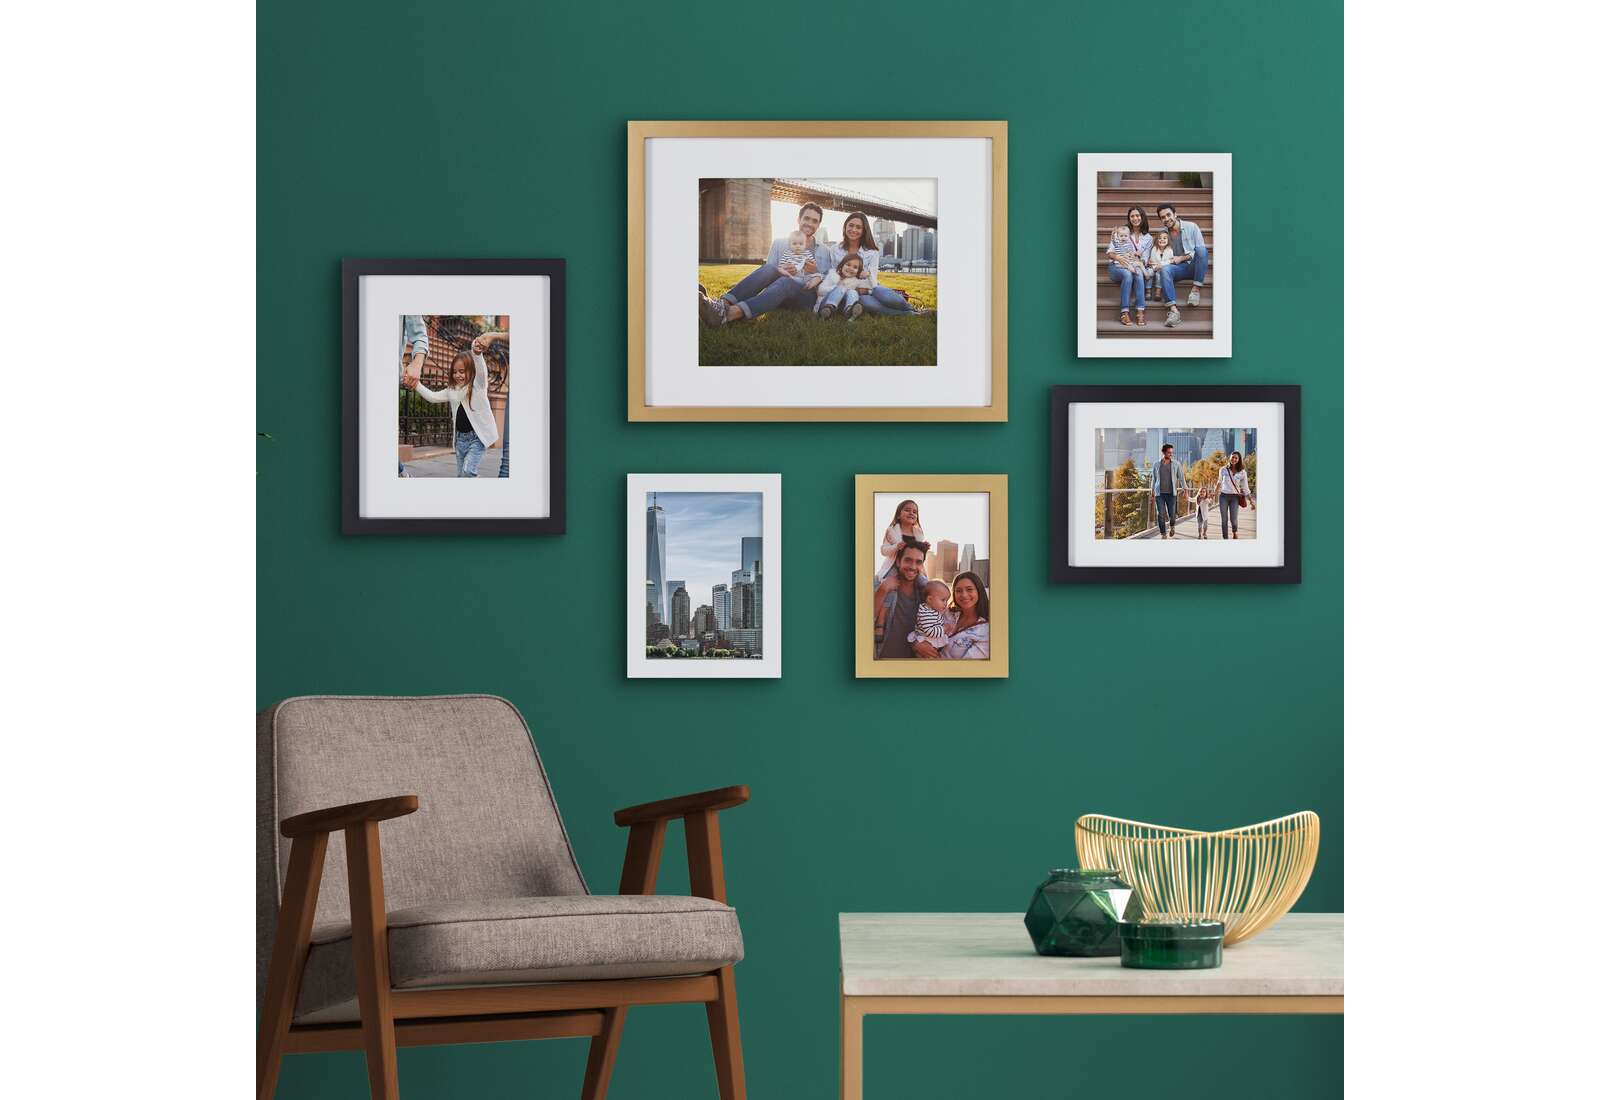 A Guide to Standard Picture Frame Sizes